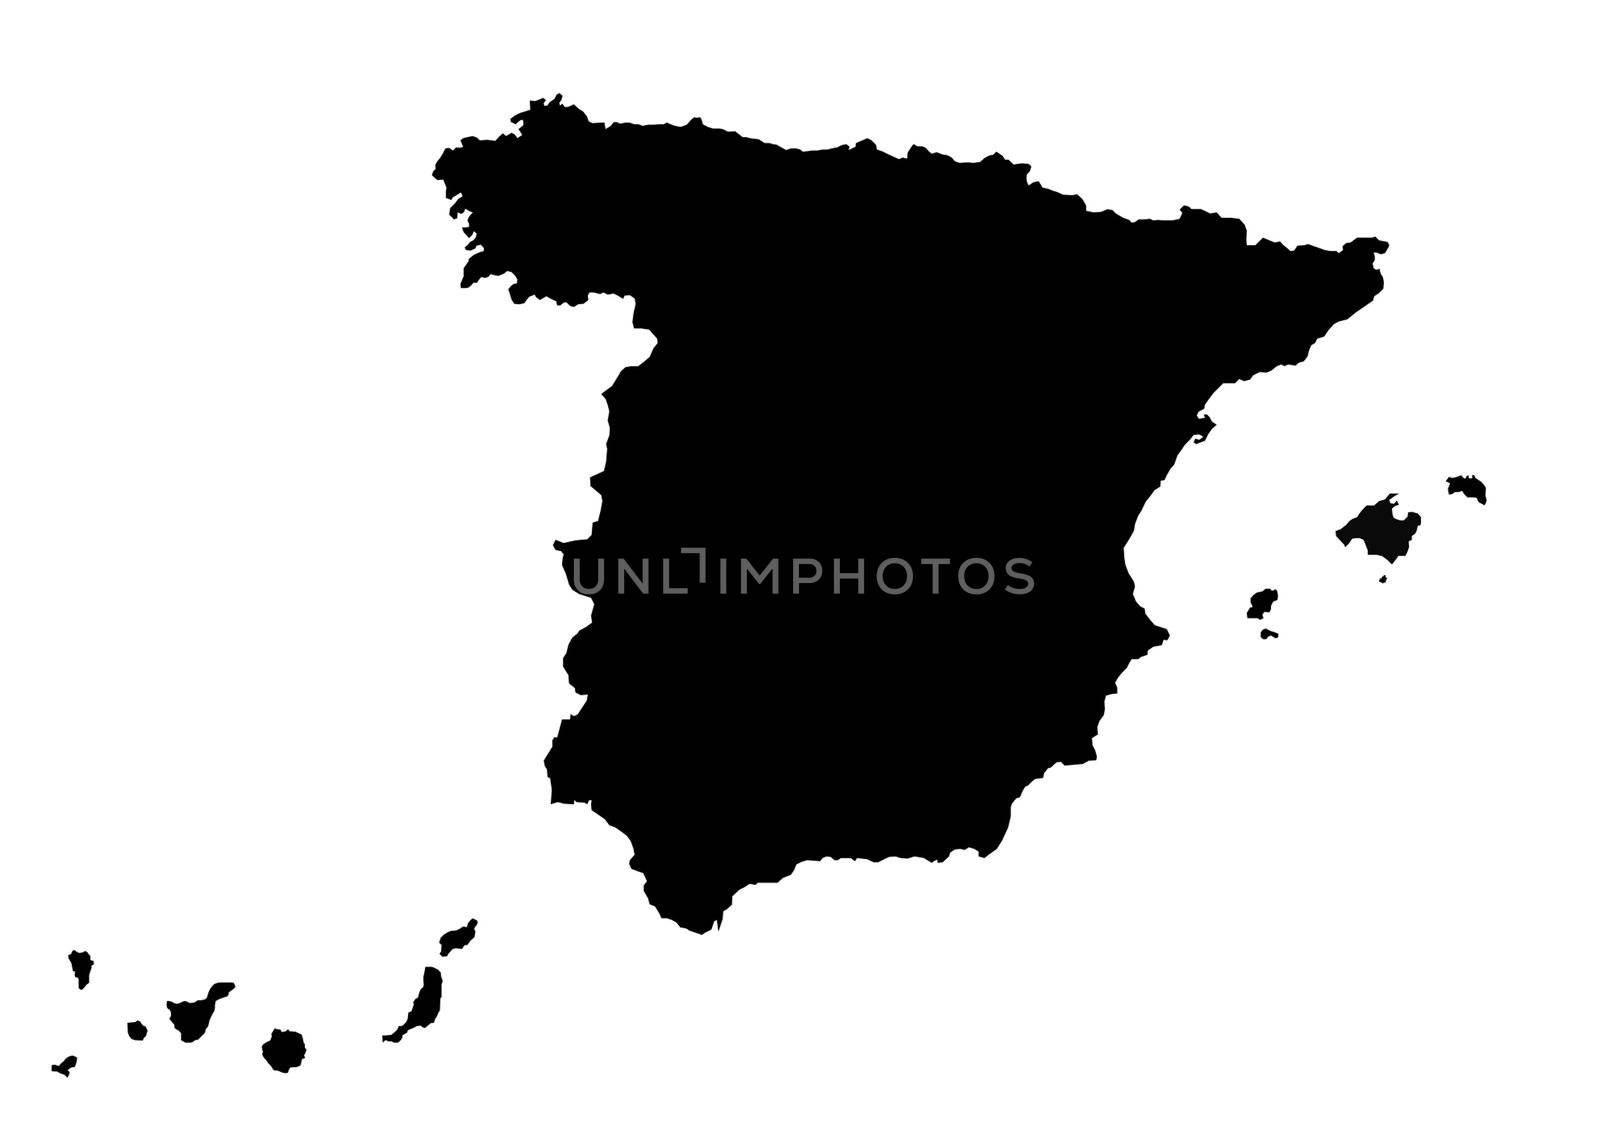 Illustration in black over white of map of Spain including Balearic Islands and Canary Islands.